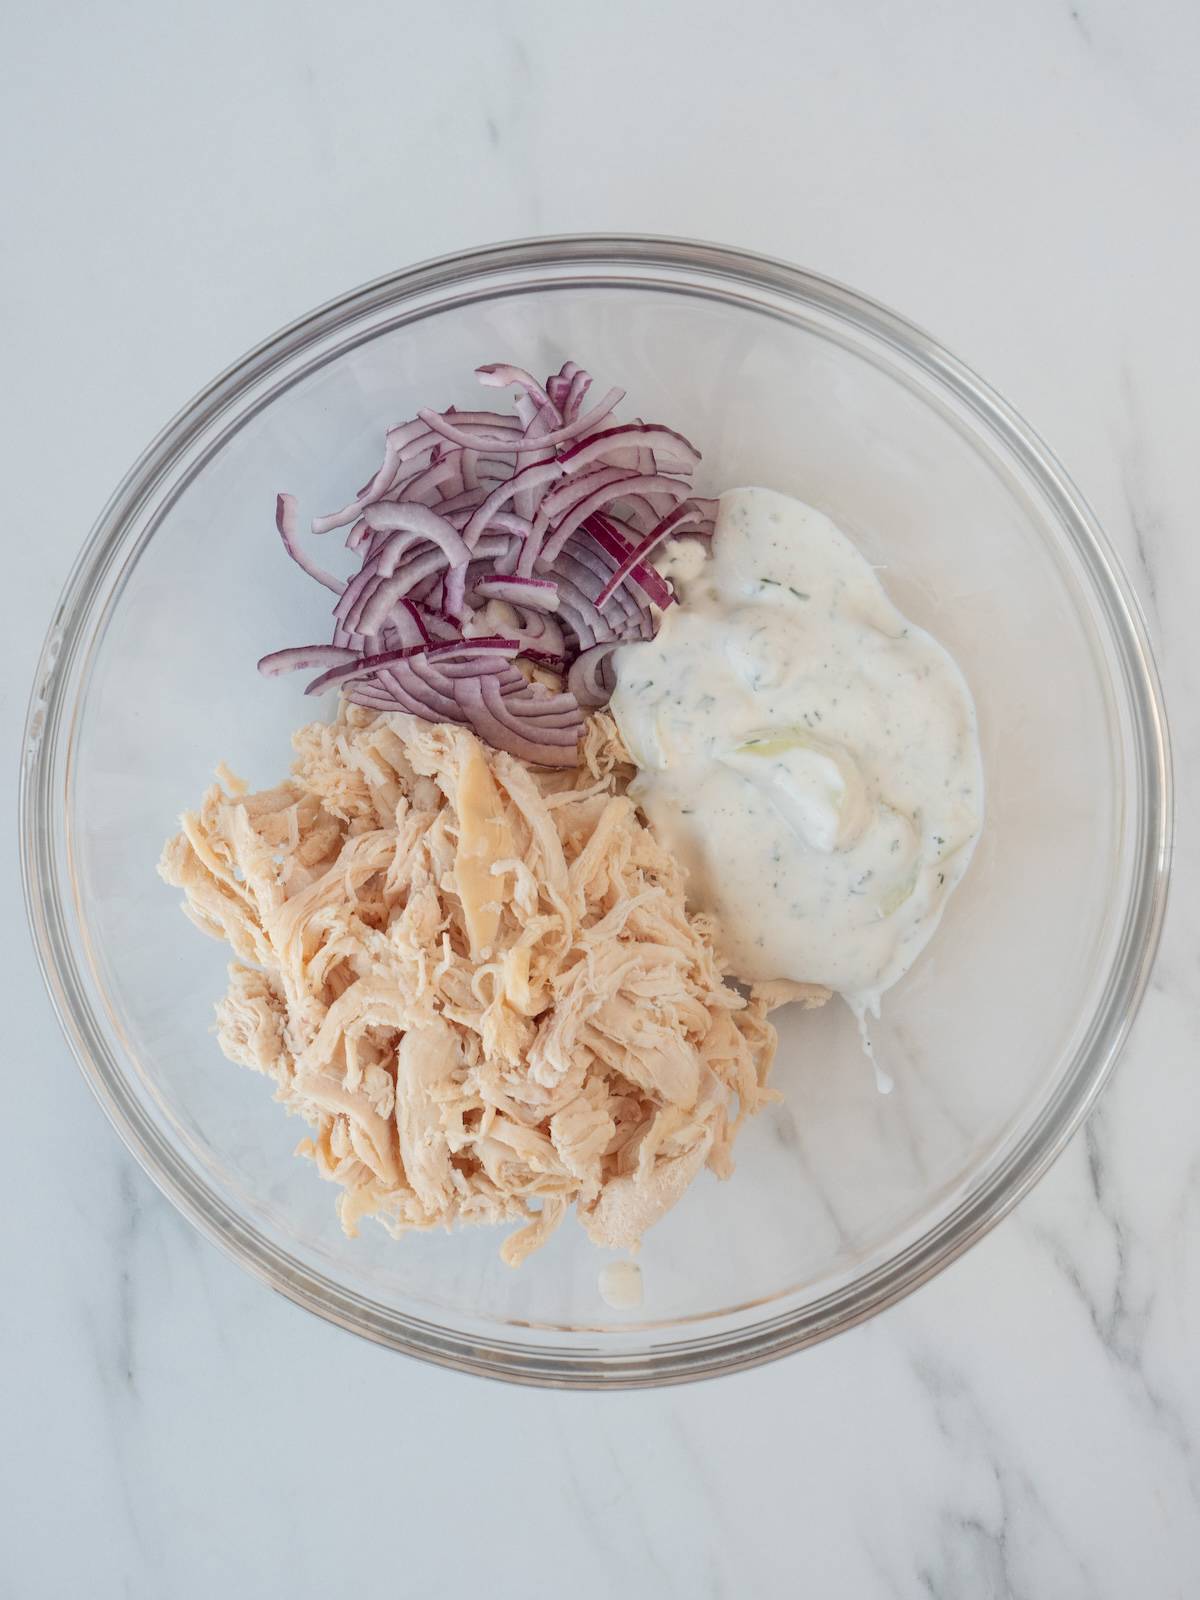 A glass mixing bowl with shredded chicken, thinly sliced red onions and tzatziki.